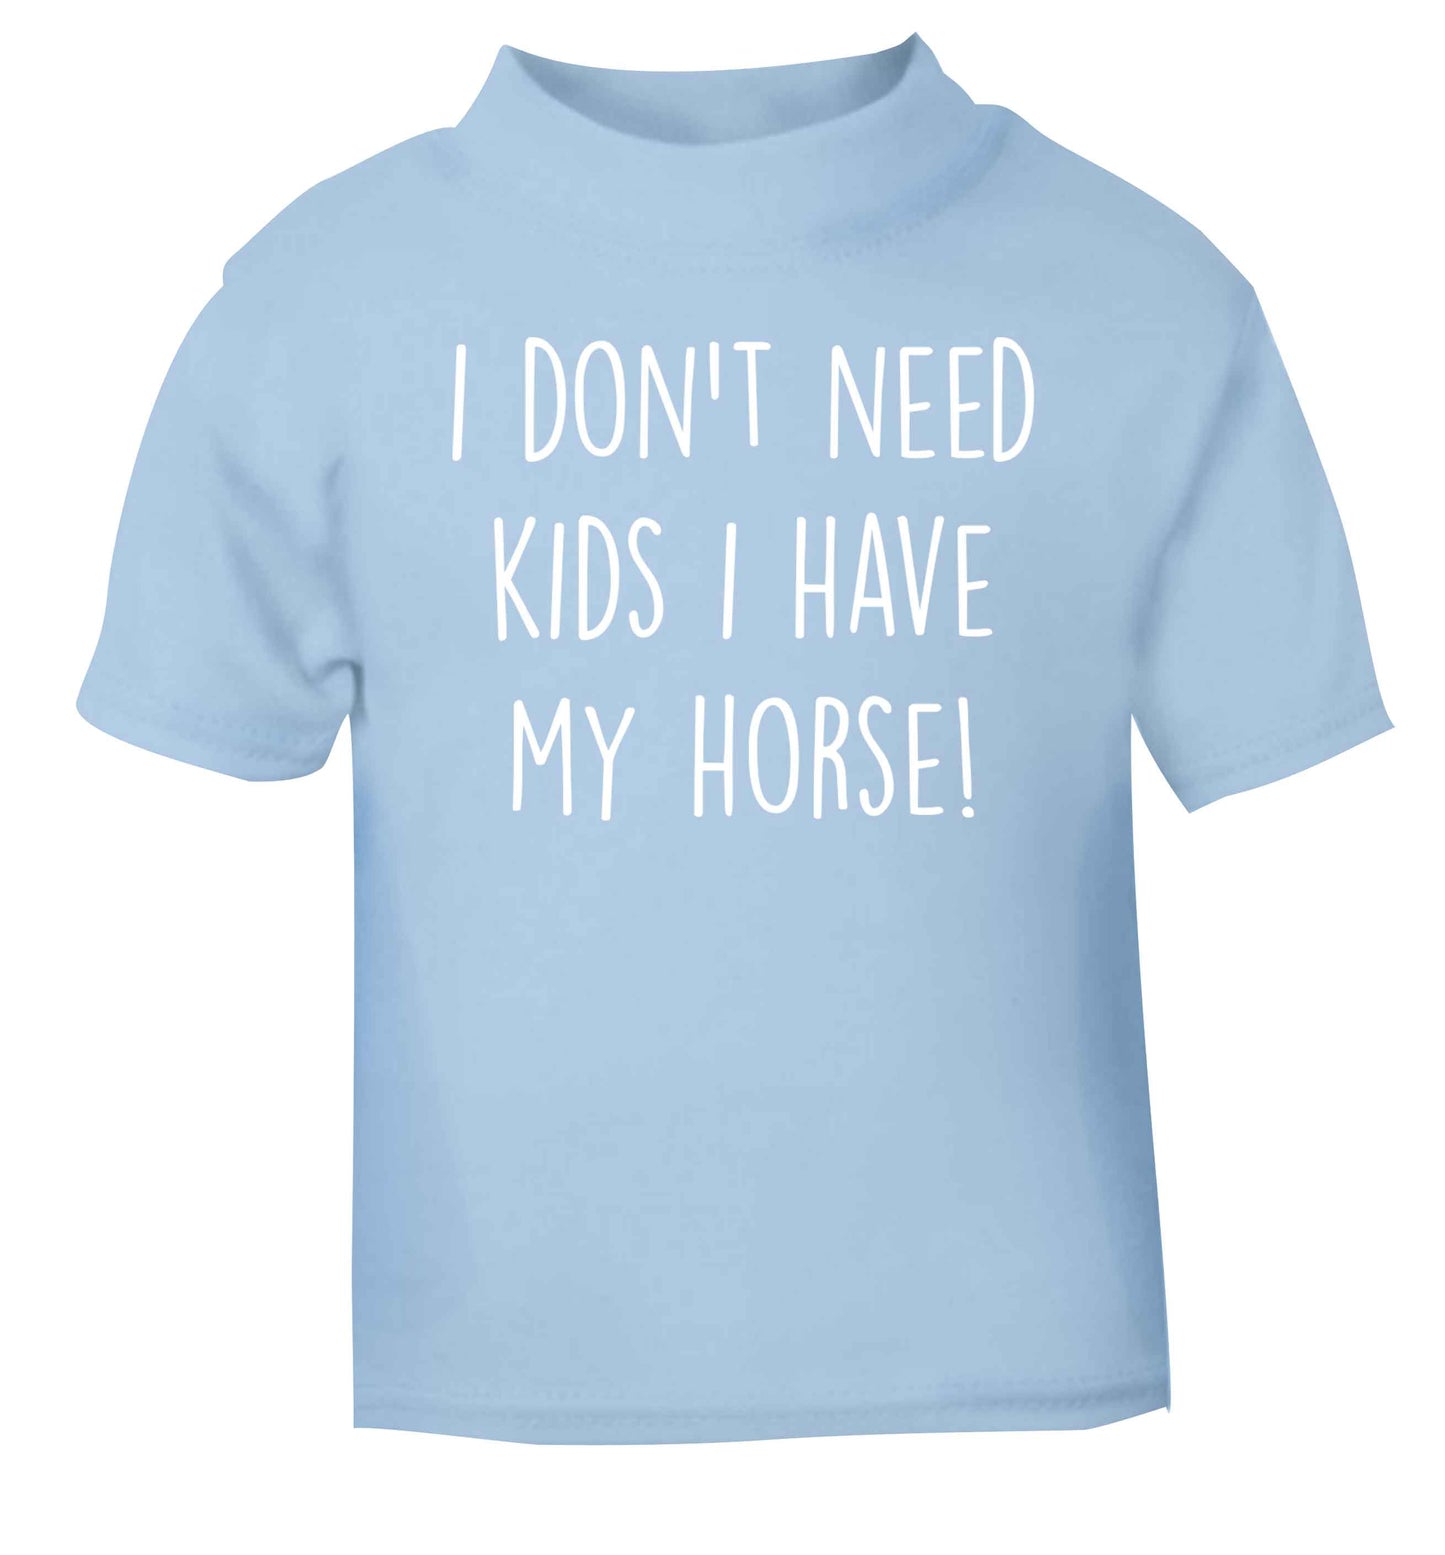 I don't need kids I have my horse light blue baby toddler Tshirt 2 Years